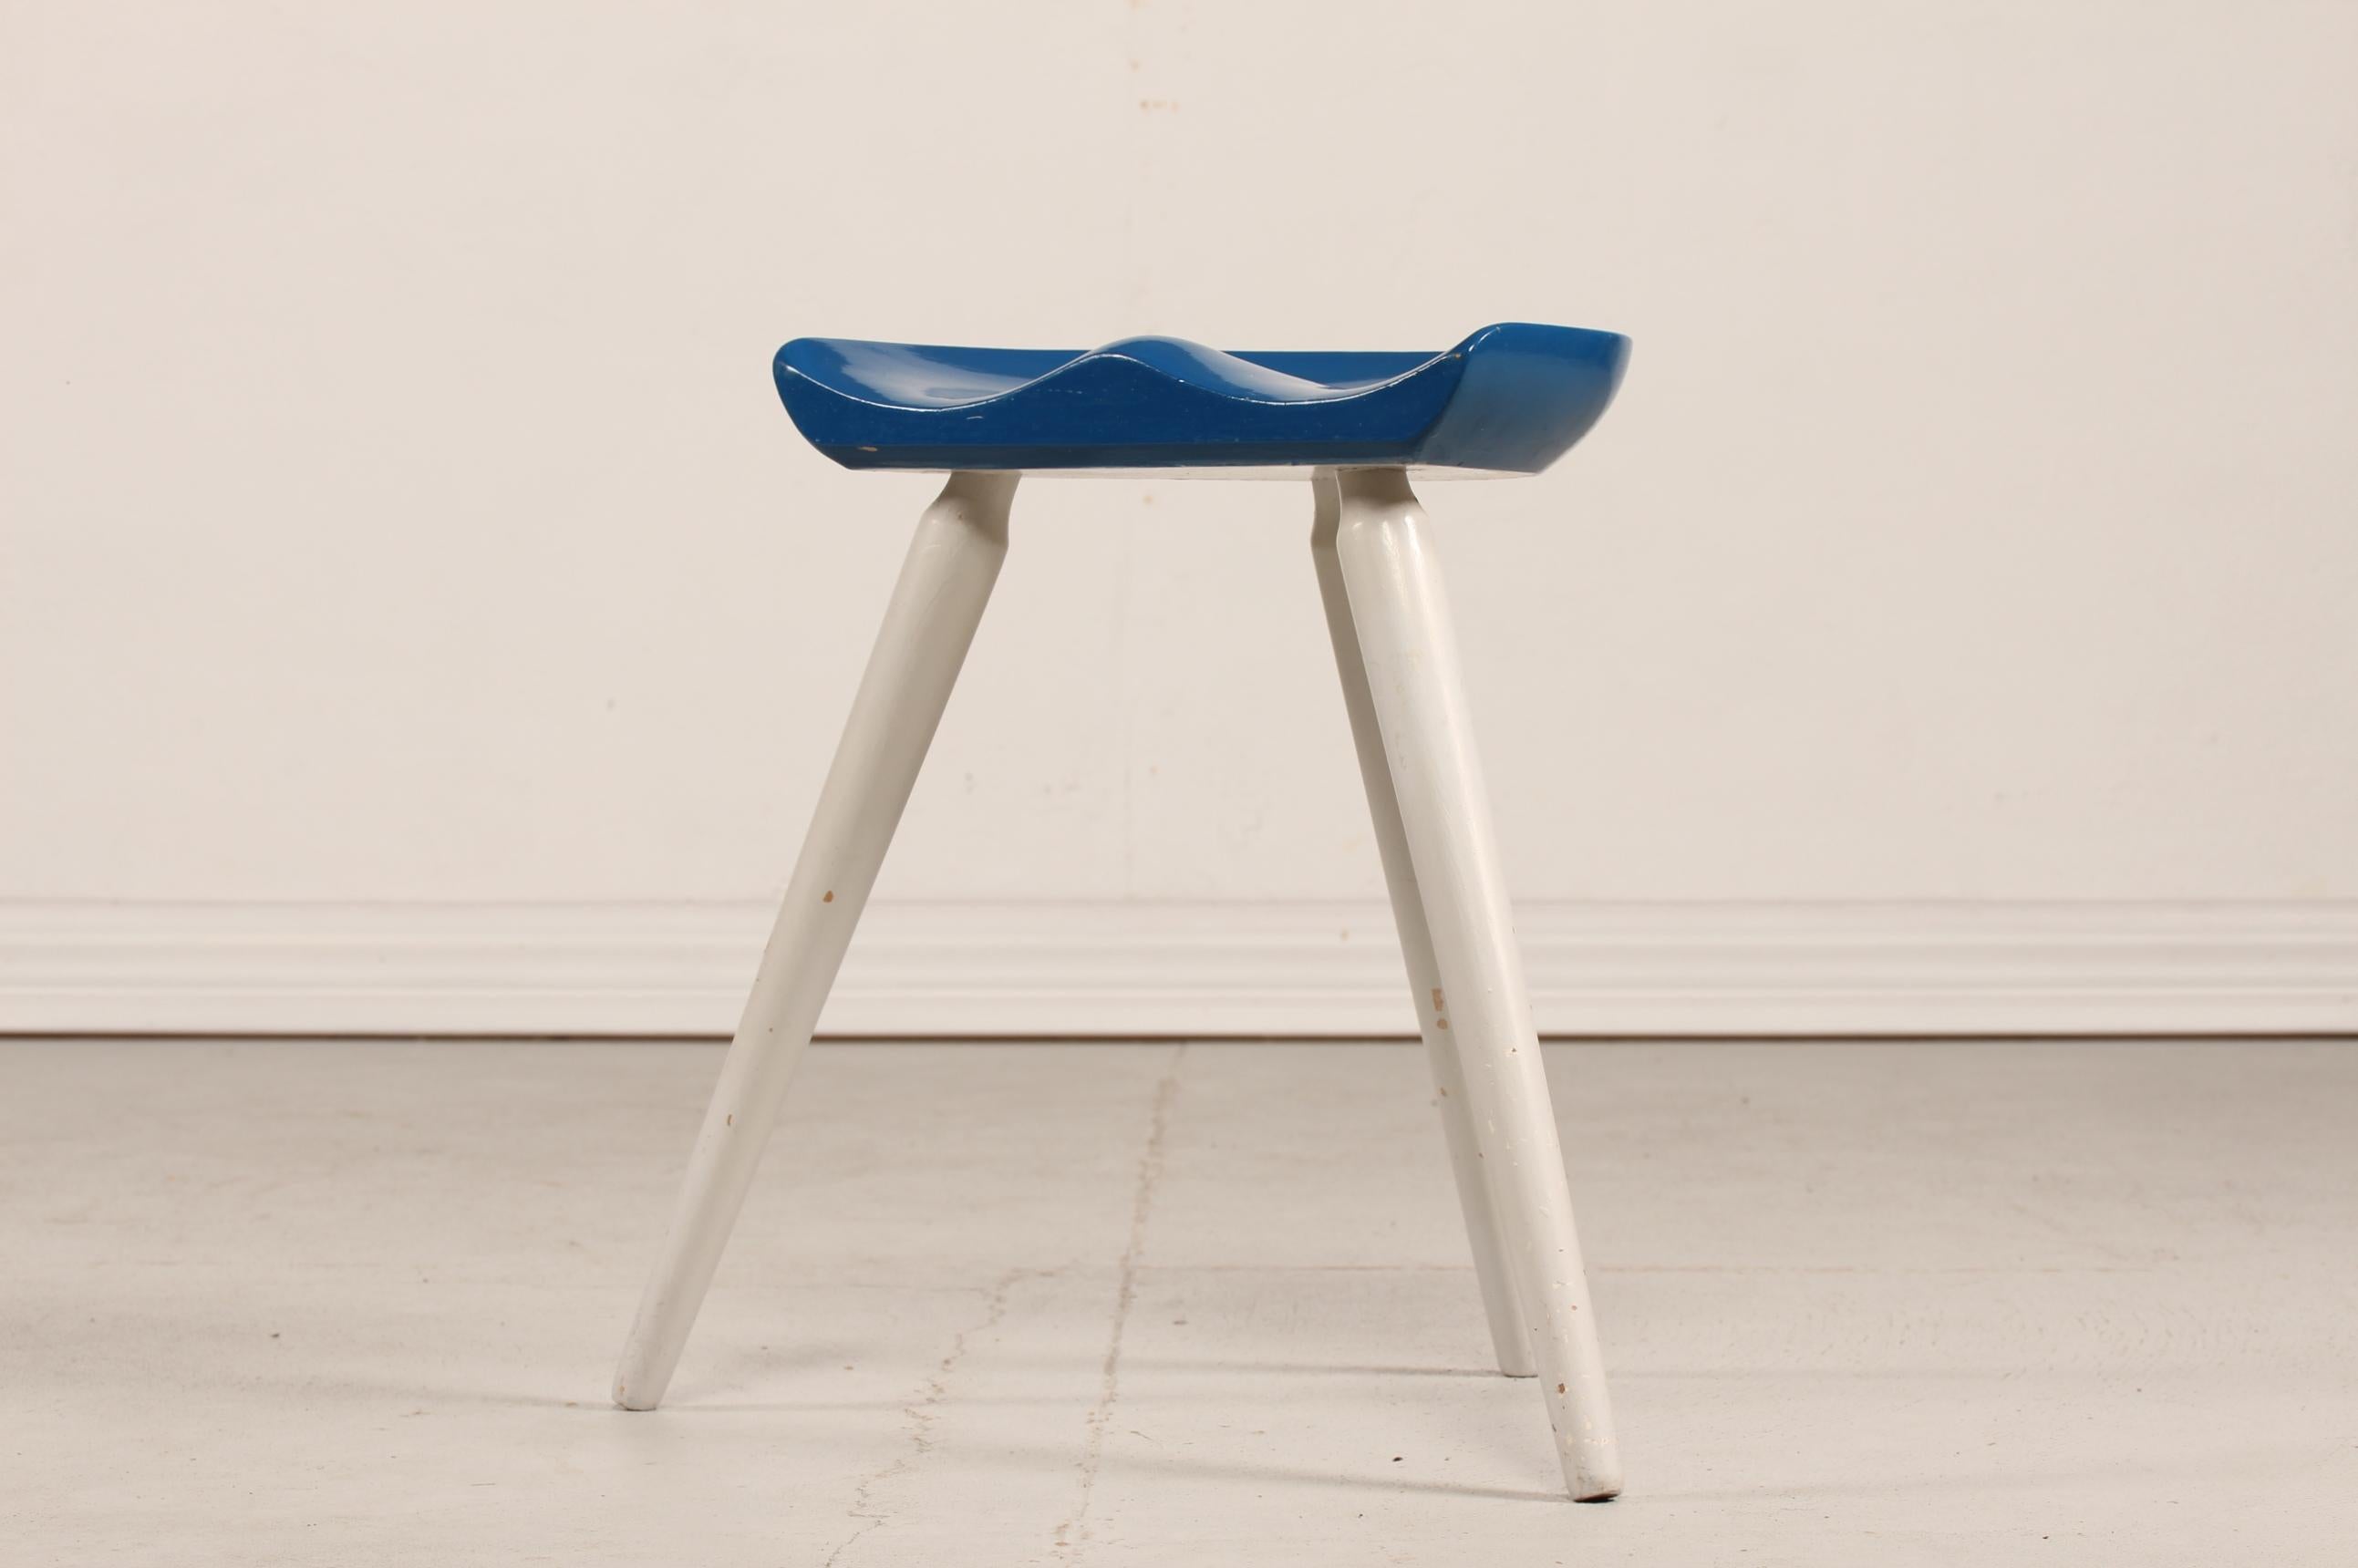 Danish modern milking stool in the style of Mogens Lassen.
It´s made of solid pine wood and comes with the original blue and white paint.
The seat is sculpted so it suits your back and it´s very comfortable to sit on.
Made, circa